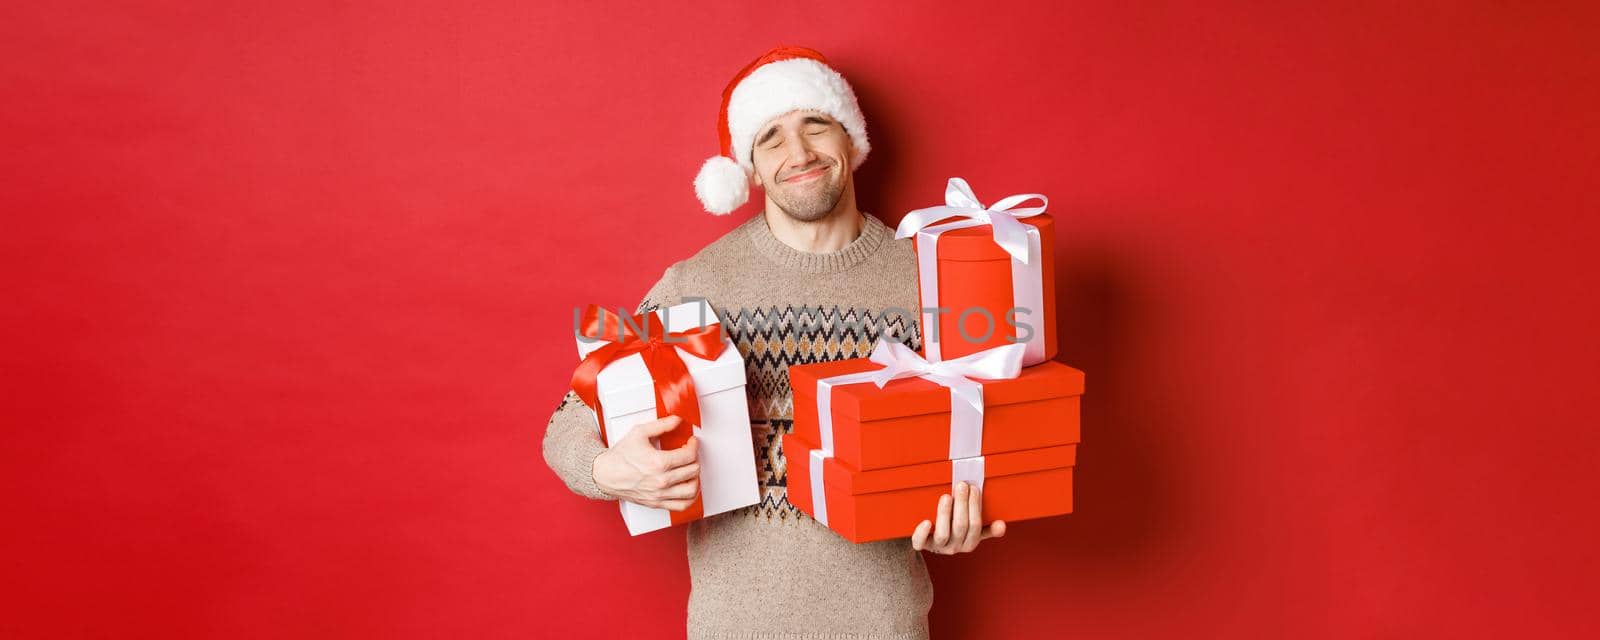 Concept of winter holidays, new year and celebration. Portrait of lovely smiling man receiving pile of presents, holding gifts and being touched with surprise, standing over red background grateful.